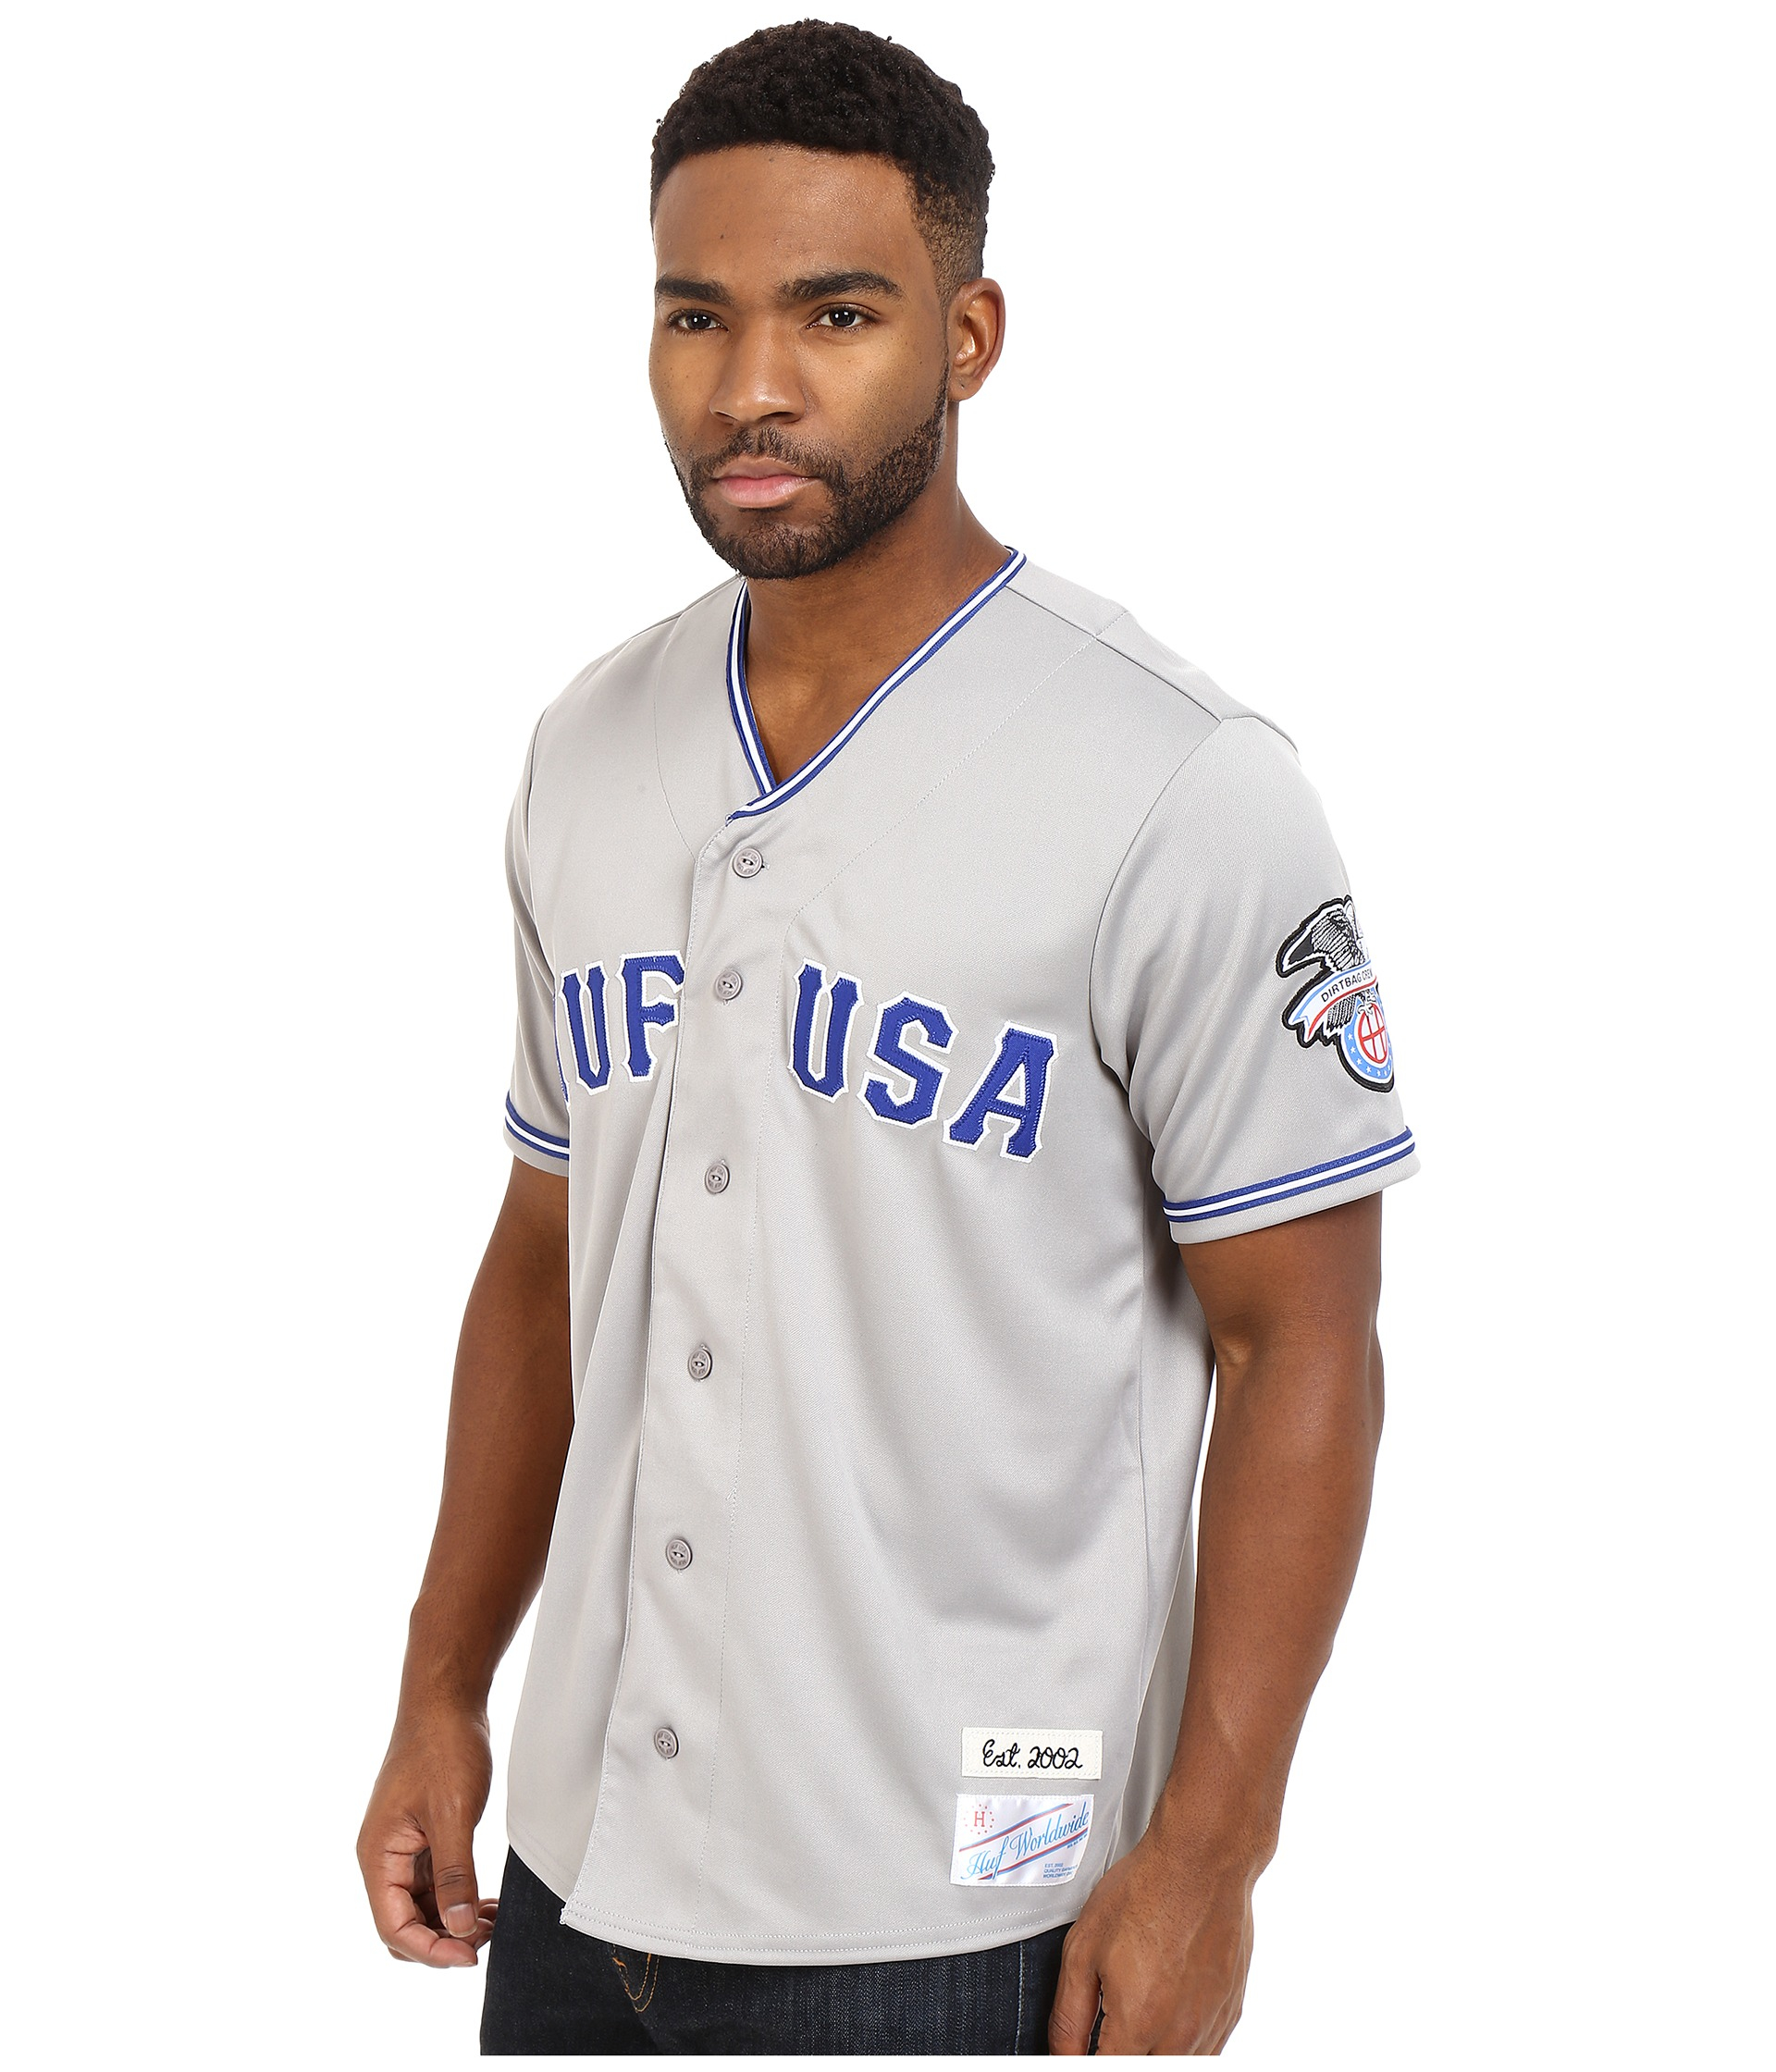 Download Lyst - Huf Territory Baseball Jersey in Gray for Men